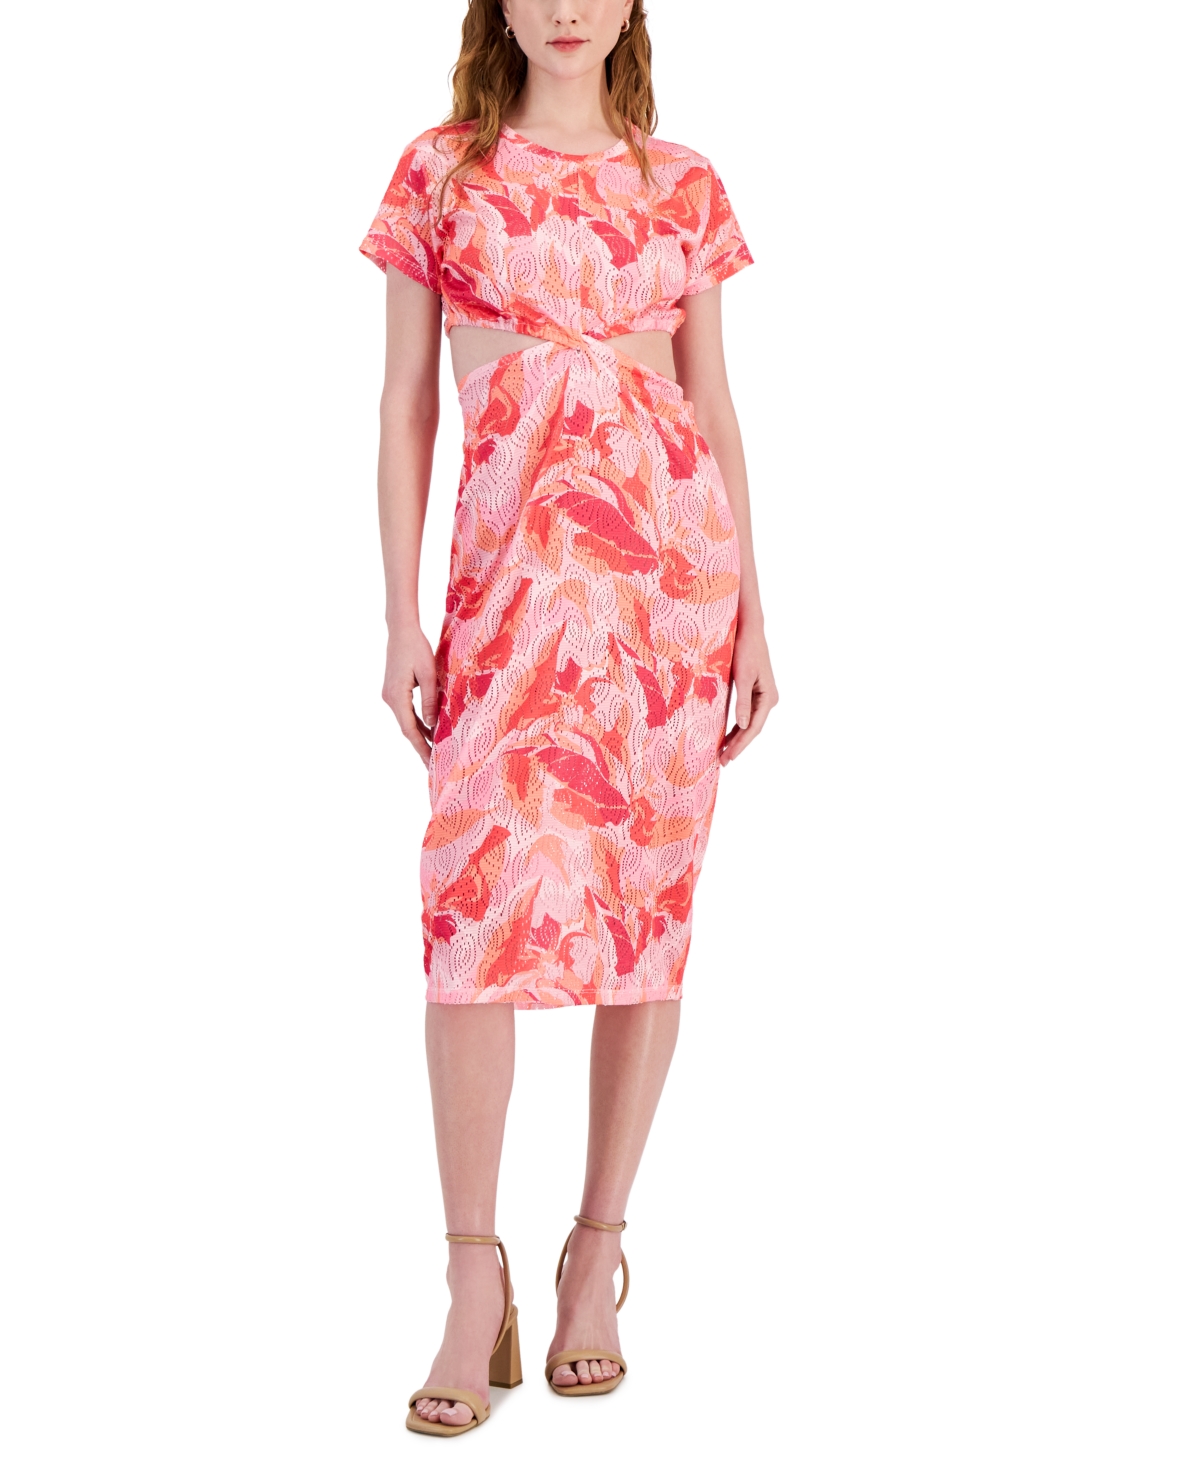 Women's Twist-Front Midi Cover-Up Dress, Created for Macy's - Georgia Peach/Diva Pink